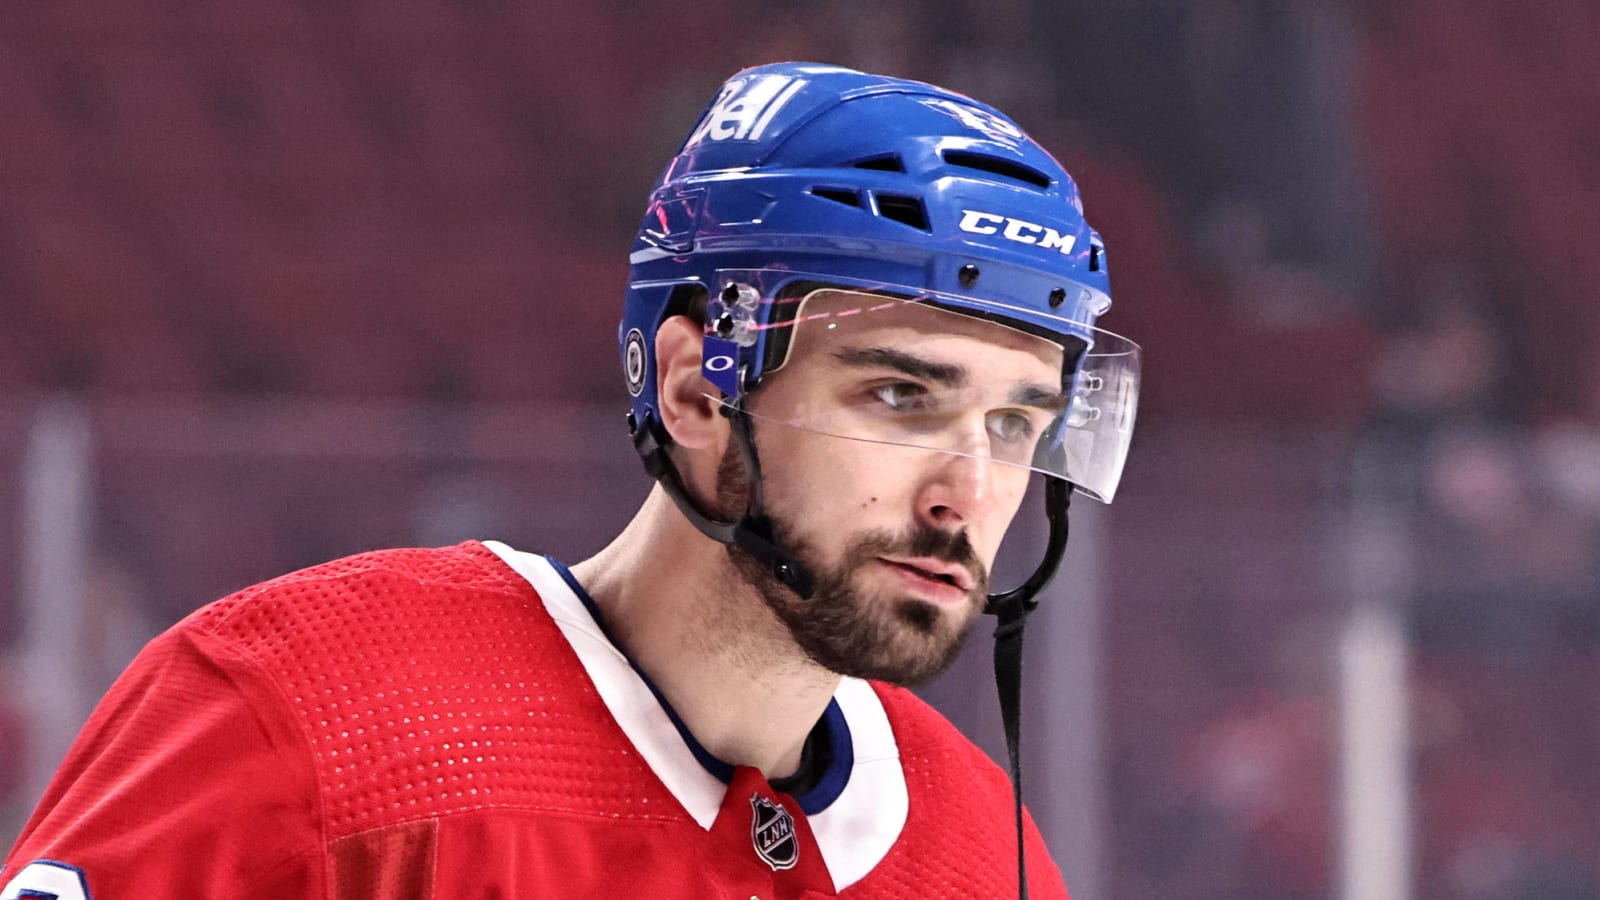 Canadiens' Cedric Paquette could be back as early as Wednesday